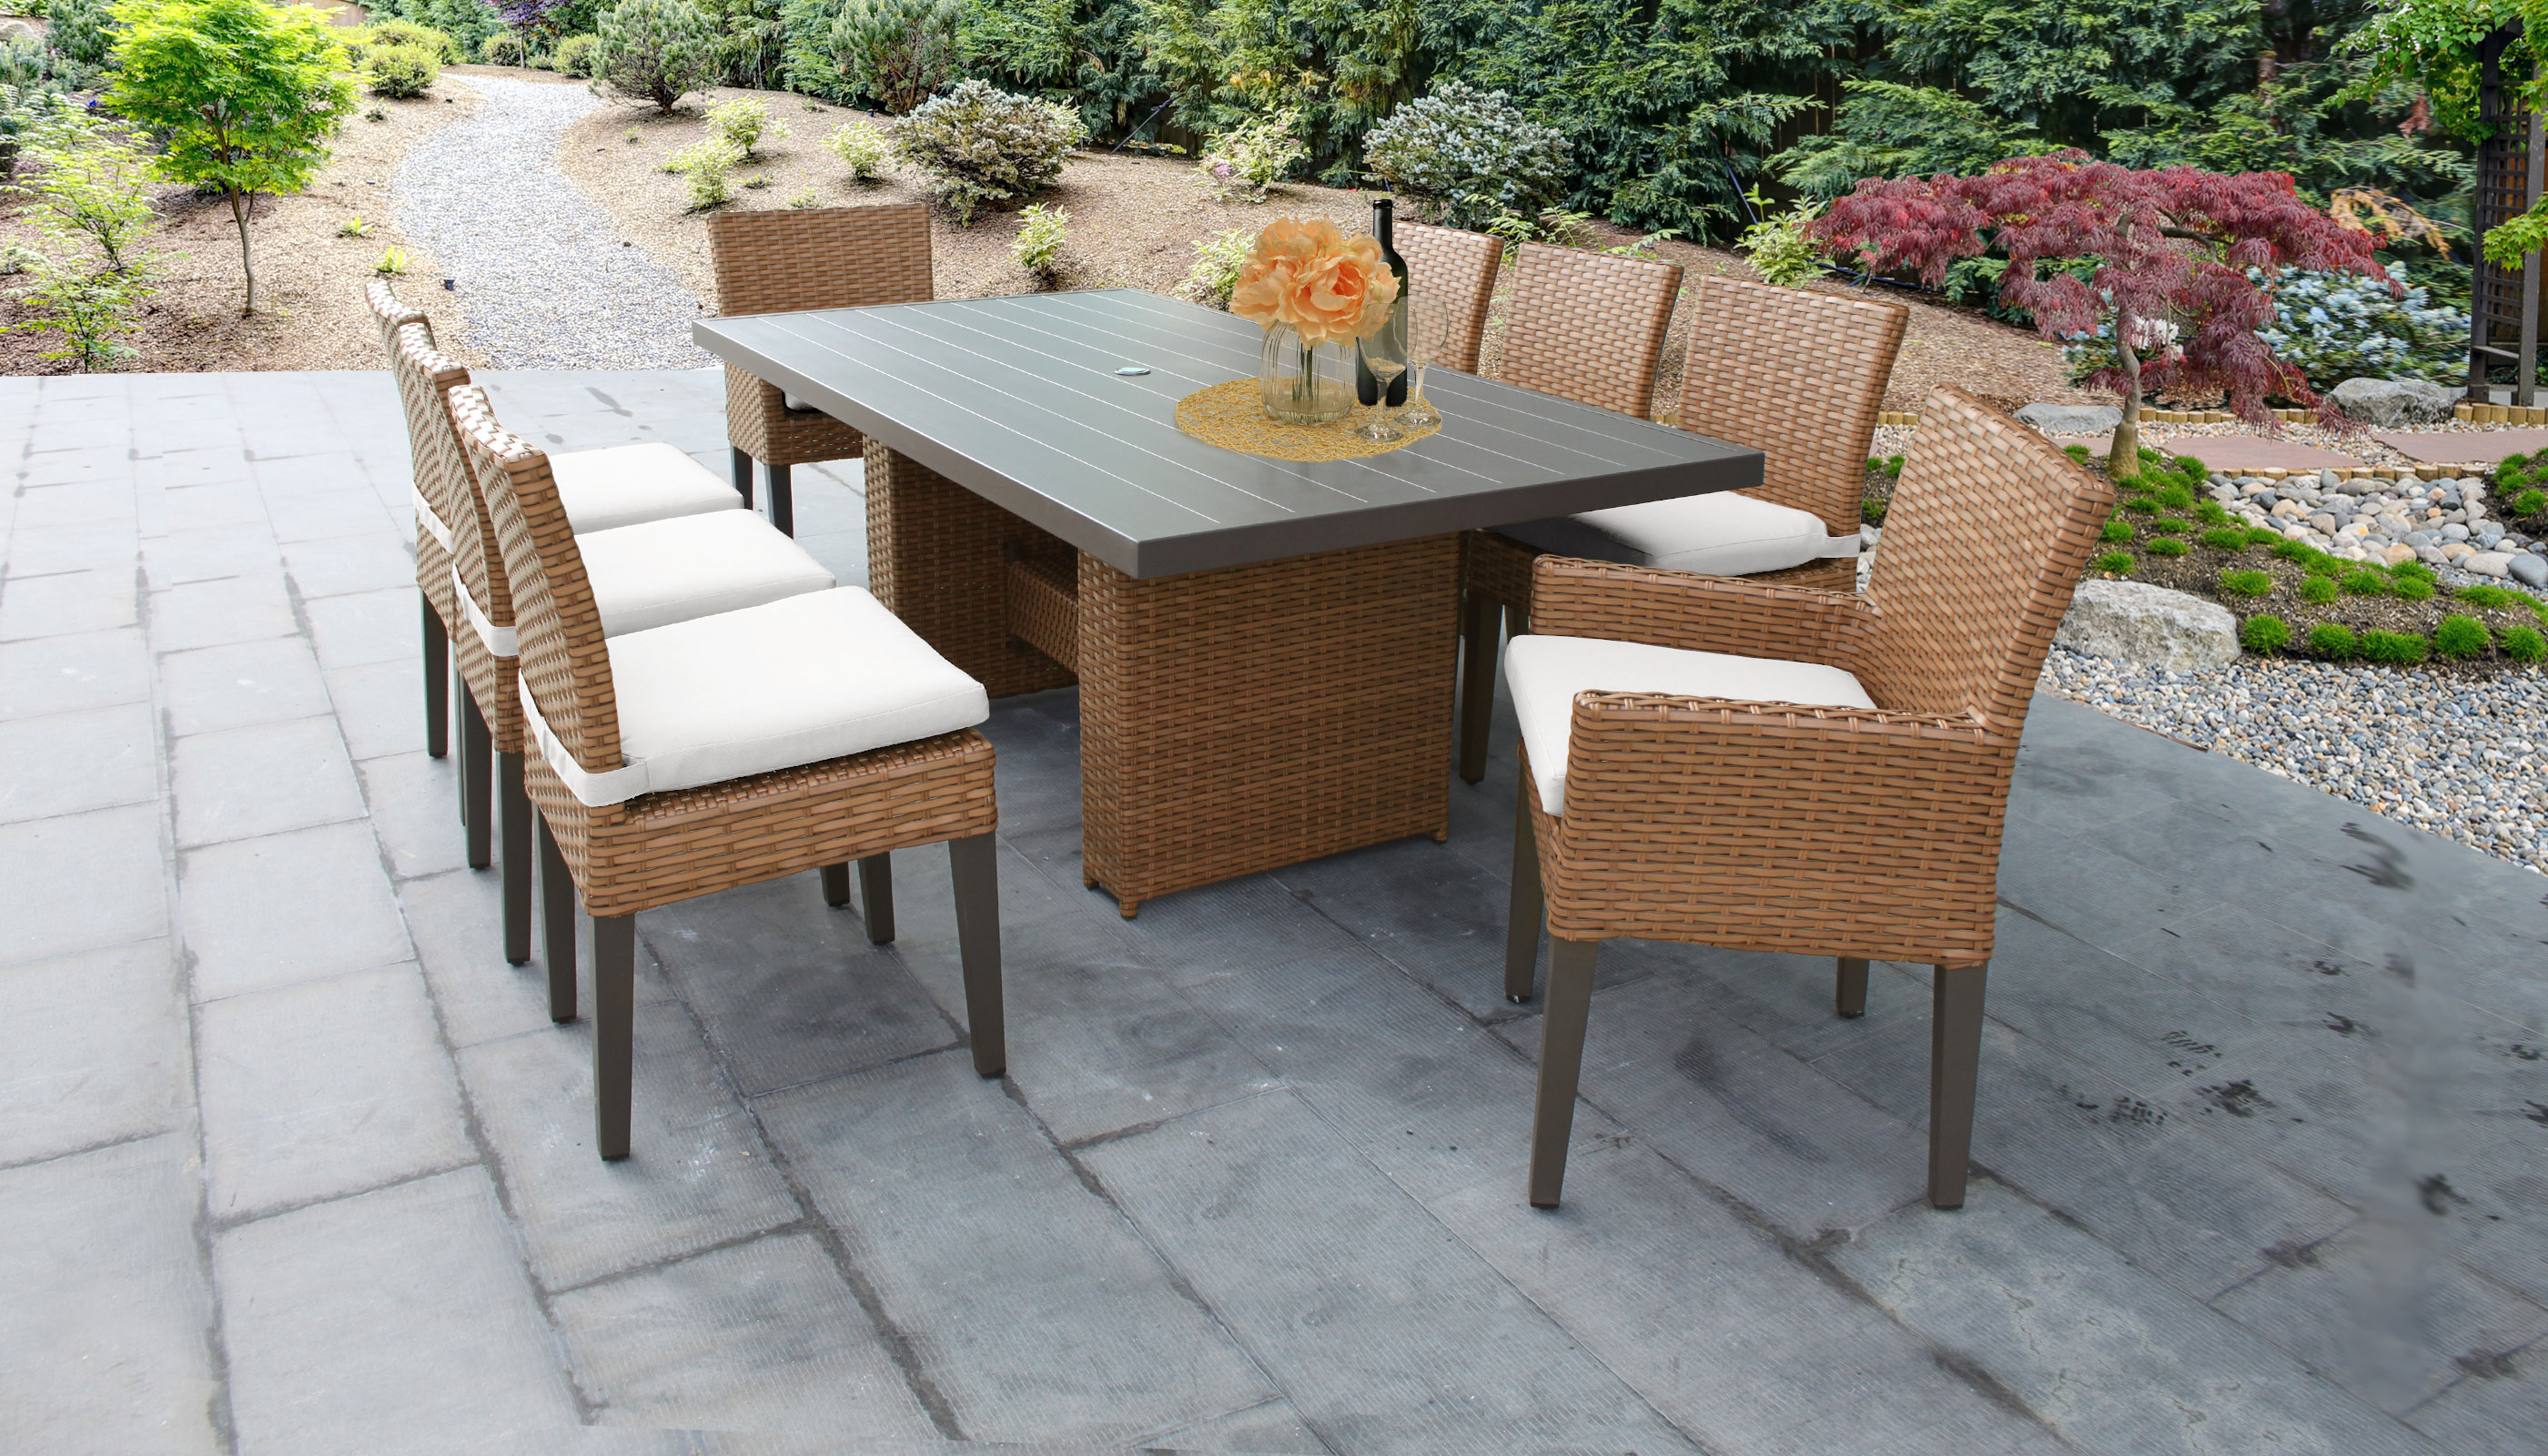 Laguna Rectangular Outdoor Patio Dining Table with with 6 ...